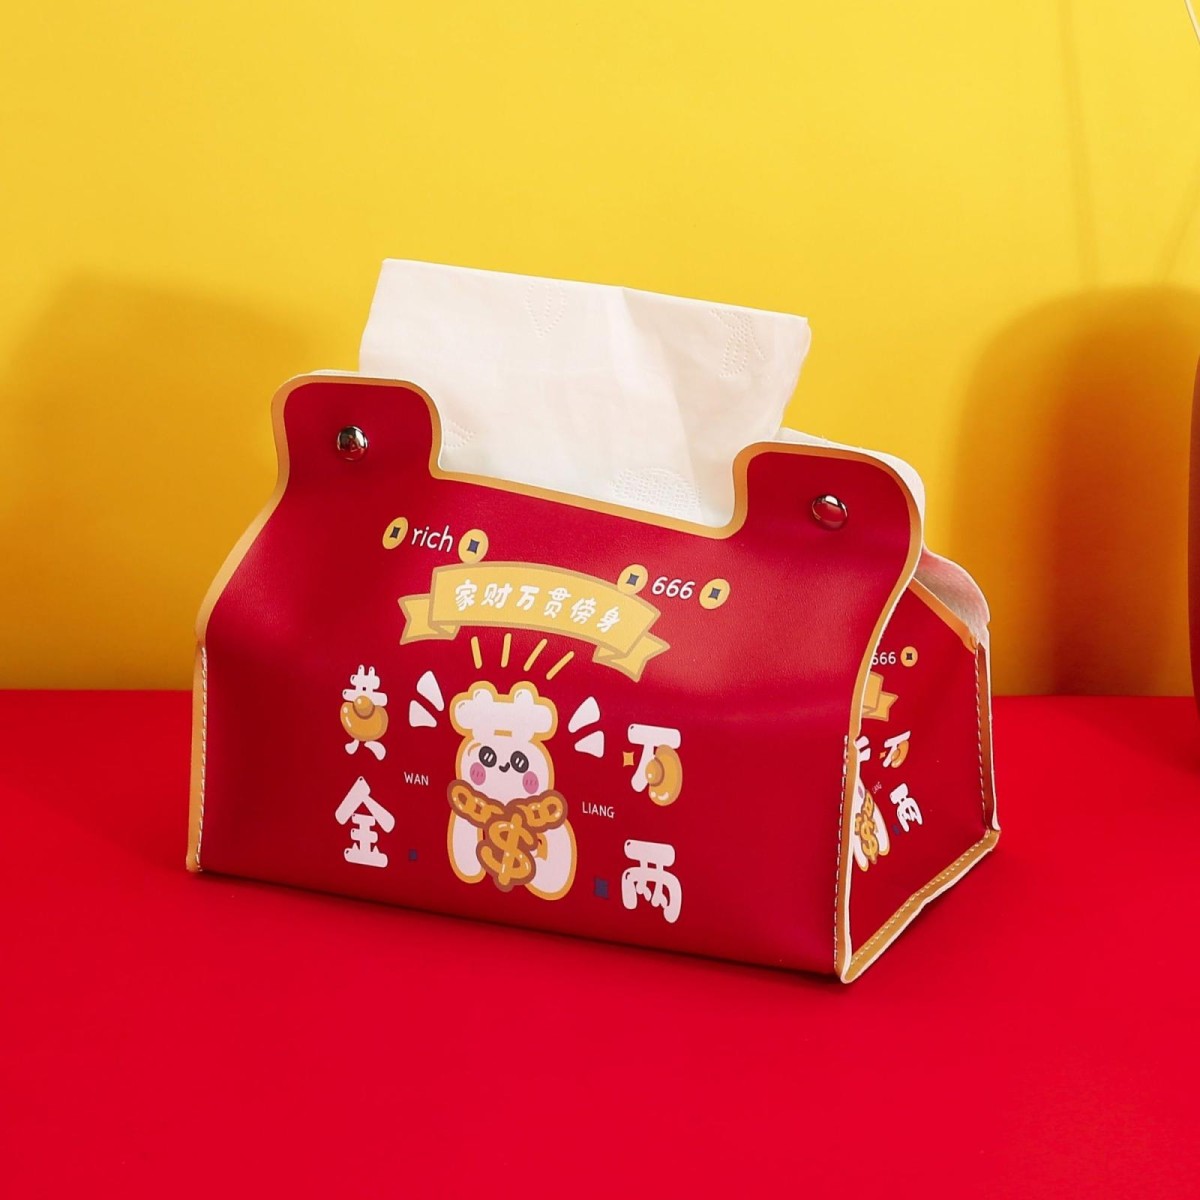 New Year Cute Tissue Box Waterproof Tissue Box Dormitory Car Carrying Living Room Universal Tissue Box, Style: Golden